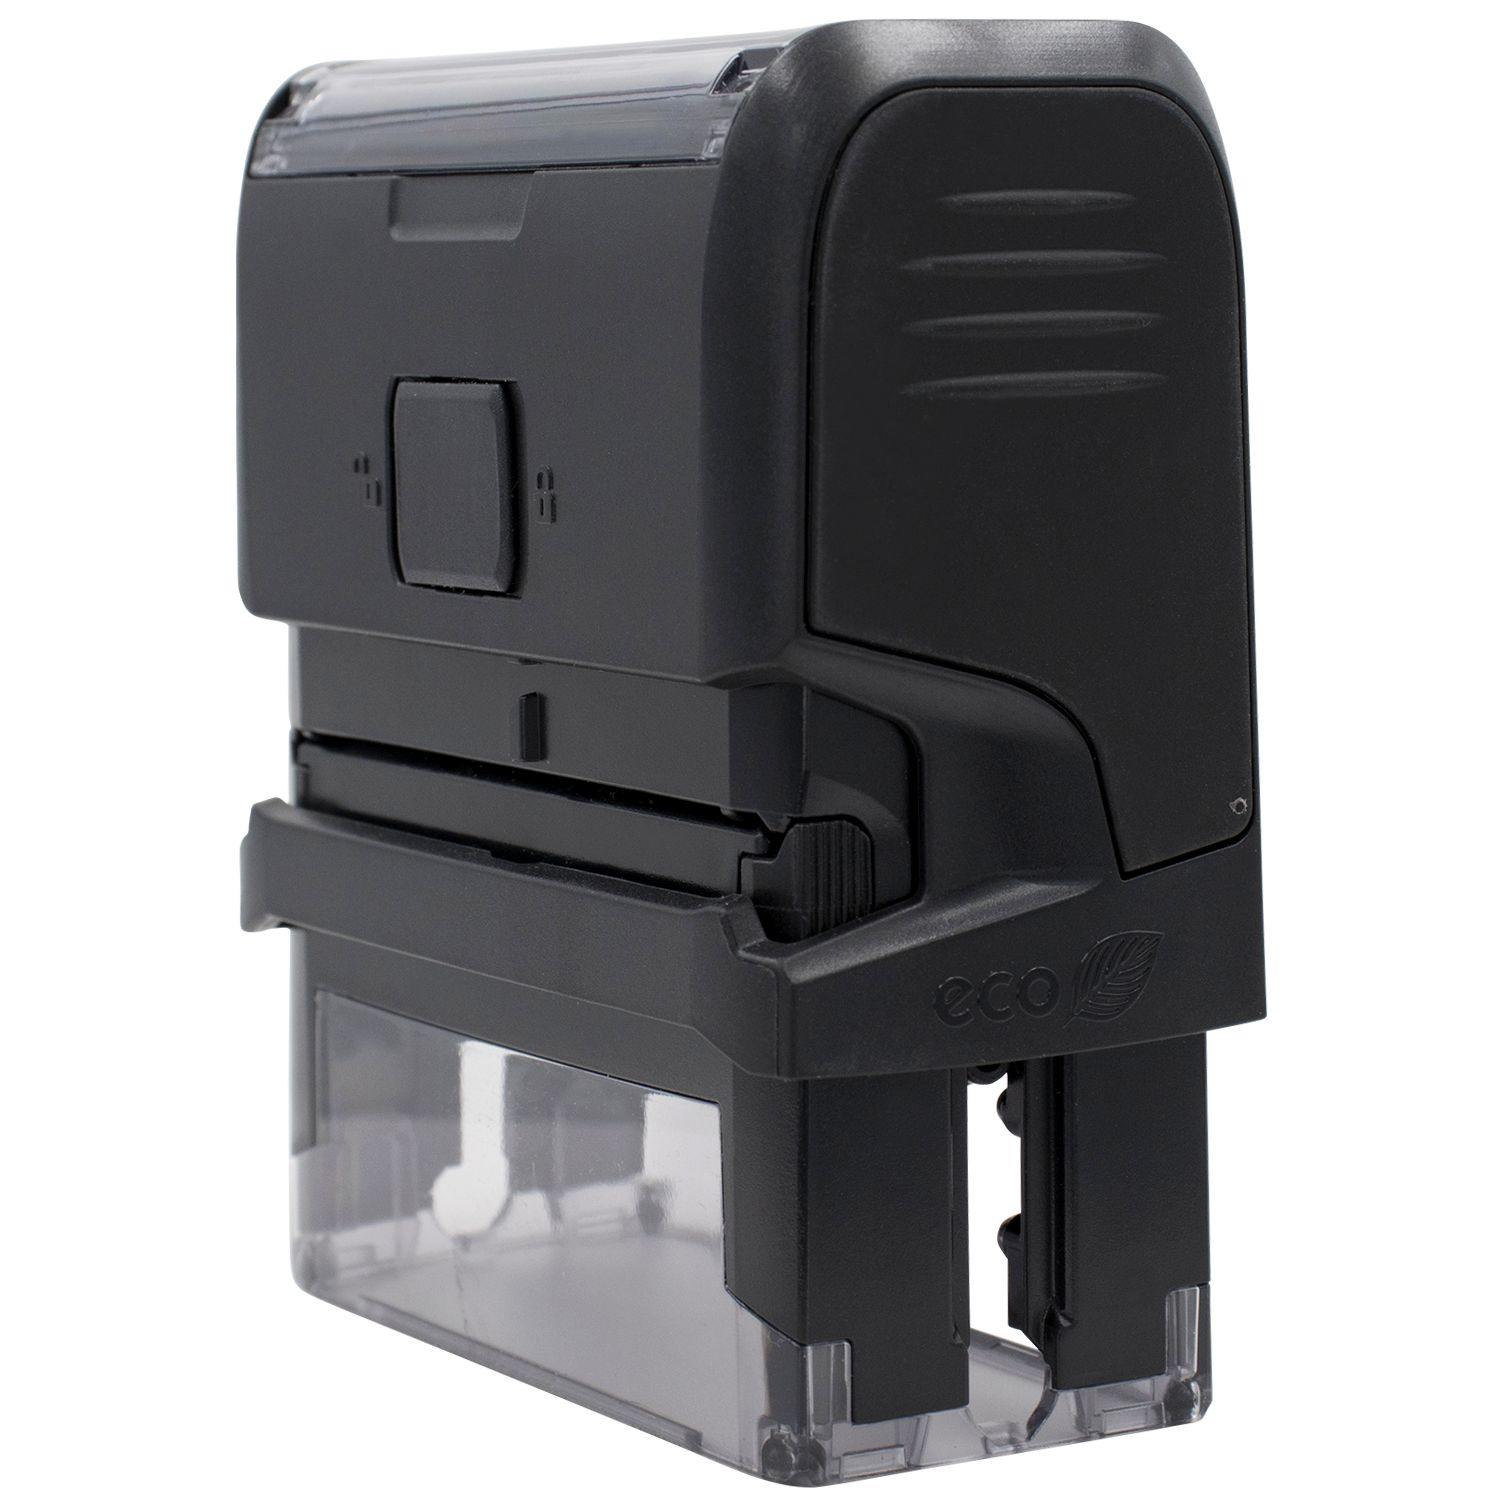 Large Self-Inking Narrow Font Confidential Stamp - Engineer Seal Stamps - Brand_Trodat, Impression Size_Large, Stamp Type_Self-Inking Stamp, Type of Use_Finance, Type of Use_Legal, Type of Use_Office